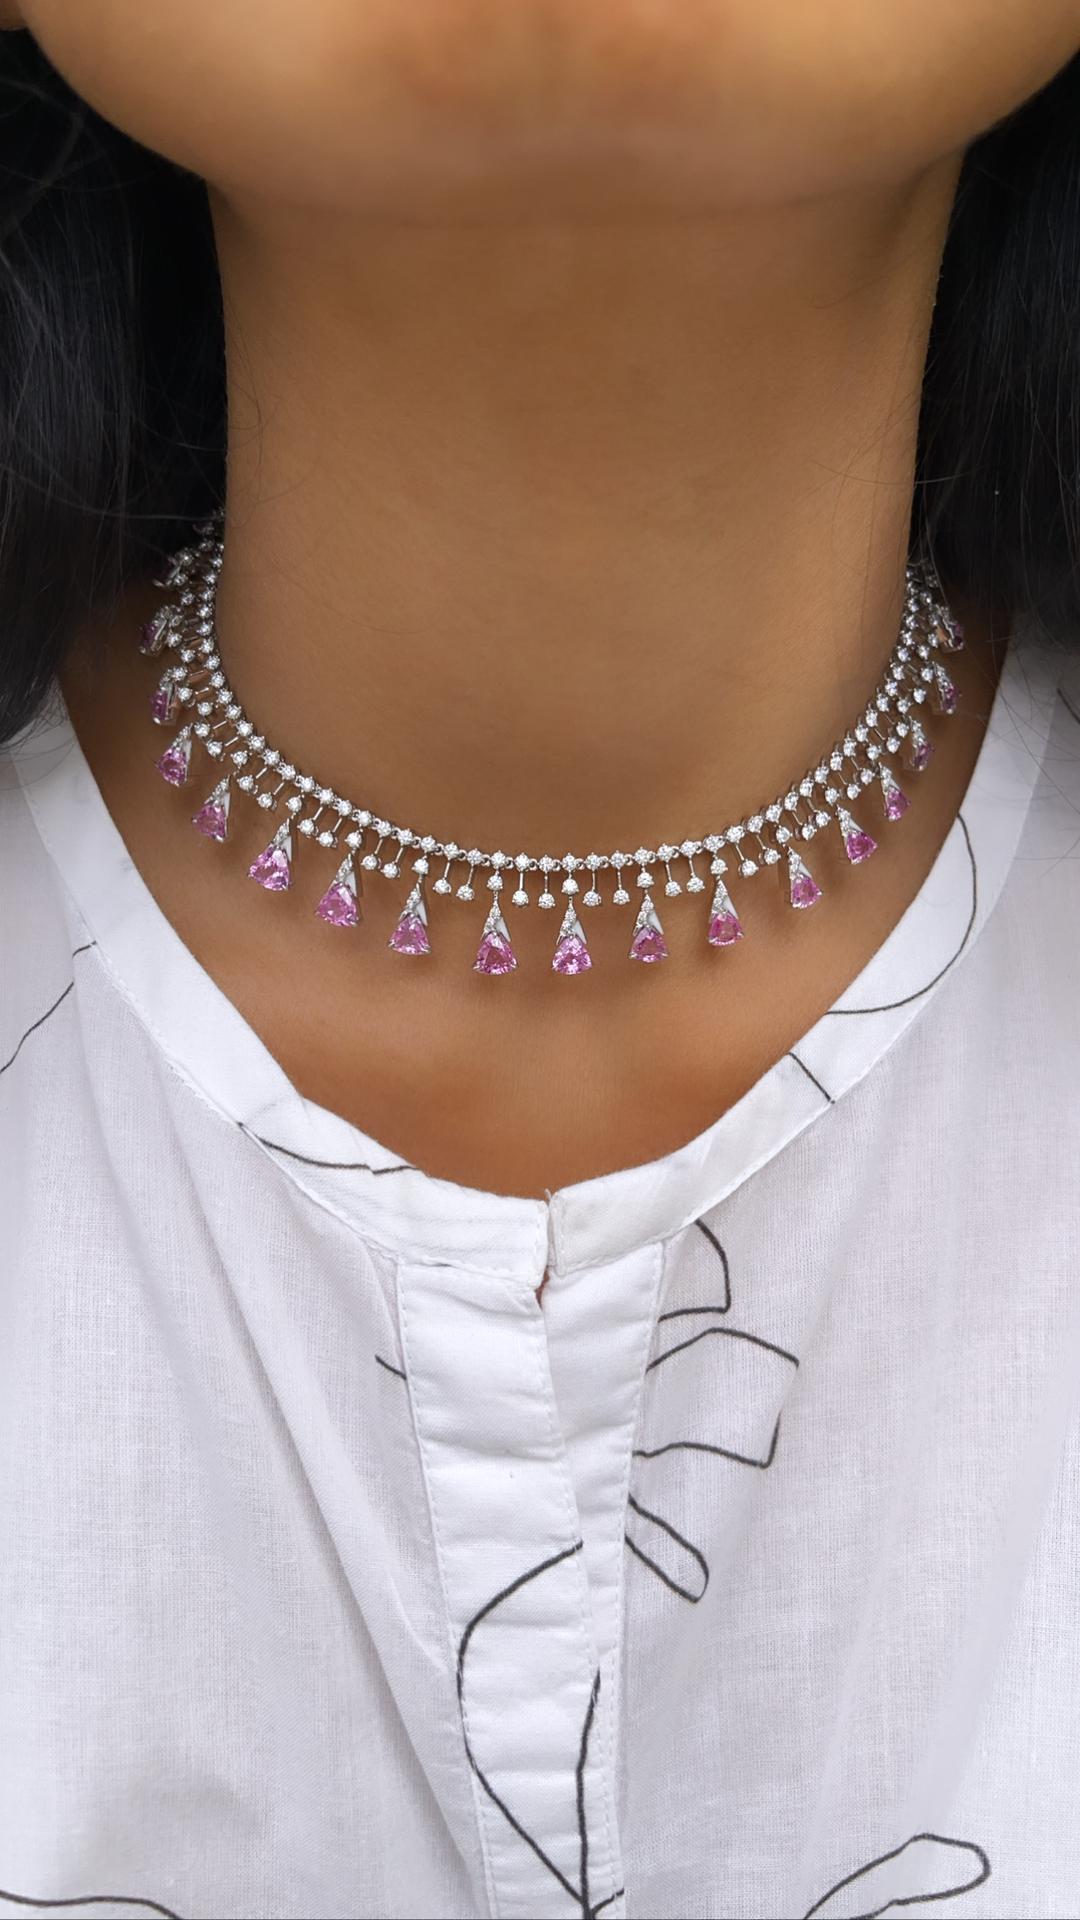 Trillion shape 0.50 carat pink sapphires, in combination with 0.05 carat round diamonds.  This choker is made in 18k white gold, and has a self adjustable ball chain mechanism.